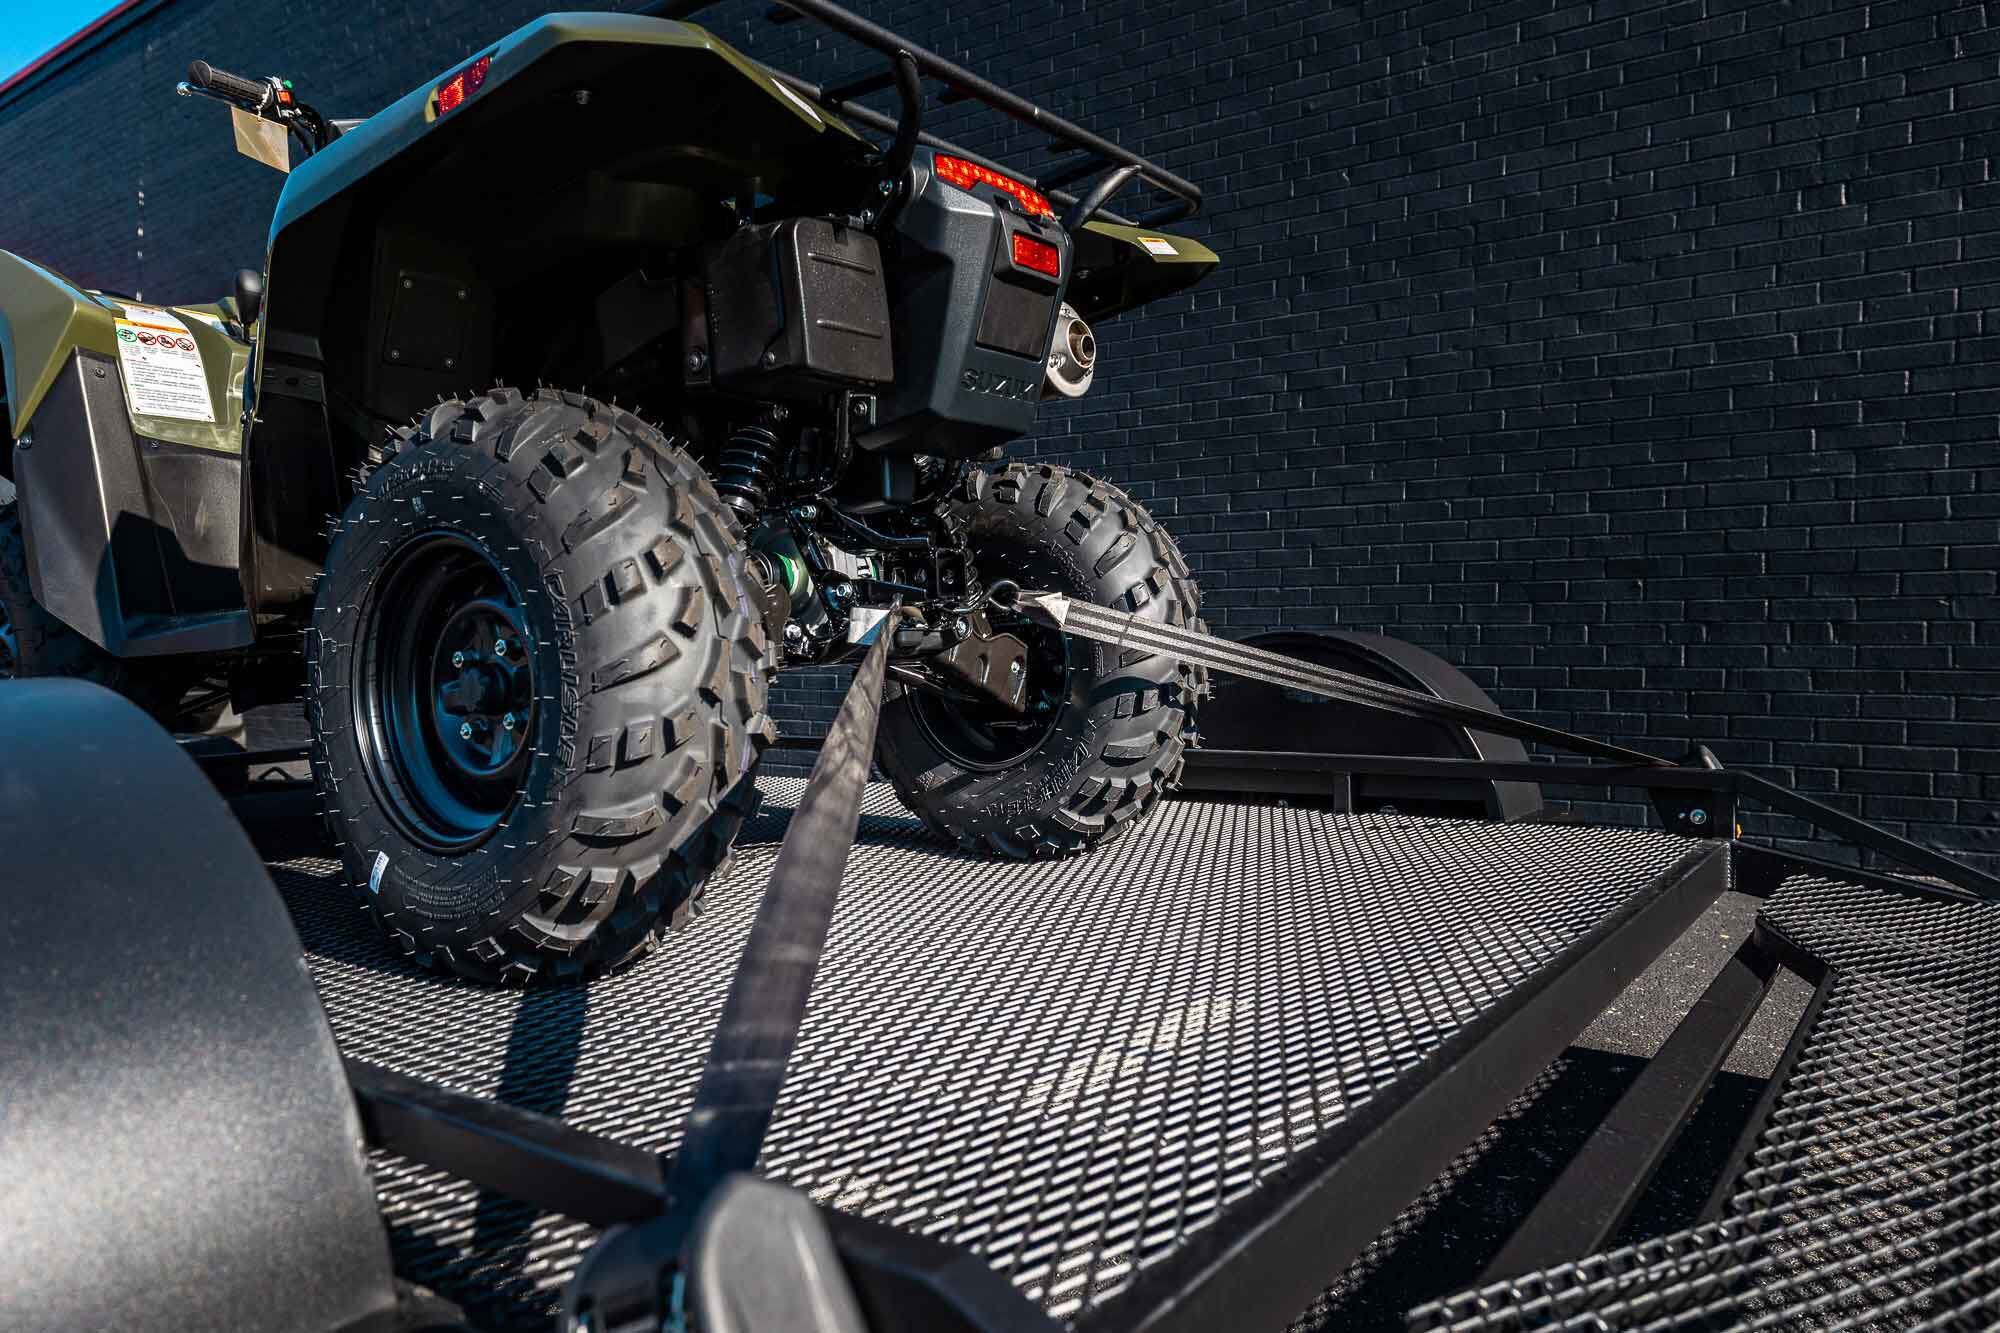 A wide open-style deck means you’re not slipping around or fighting to load your ATVs sideways.